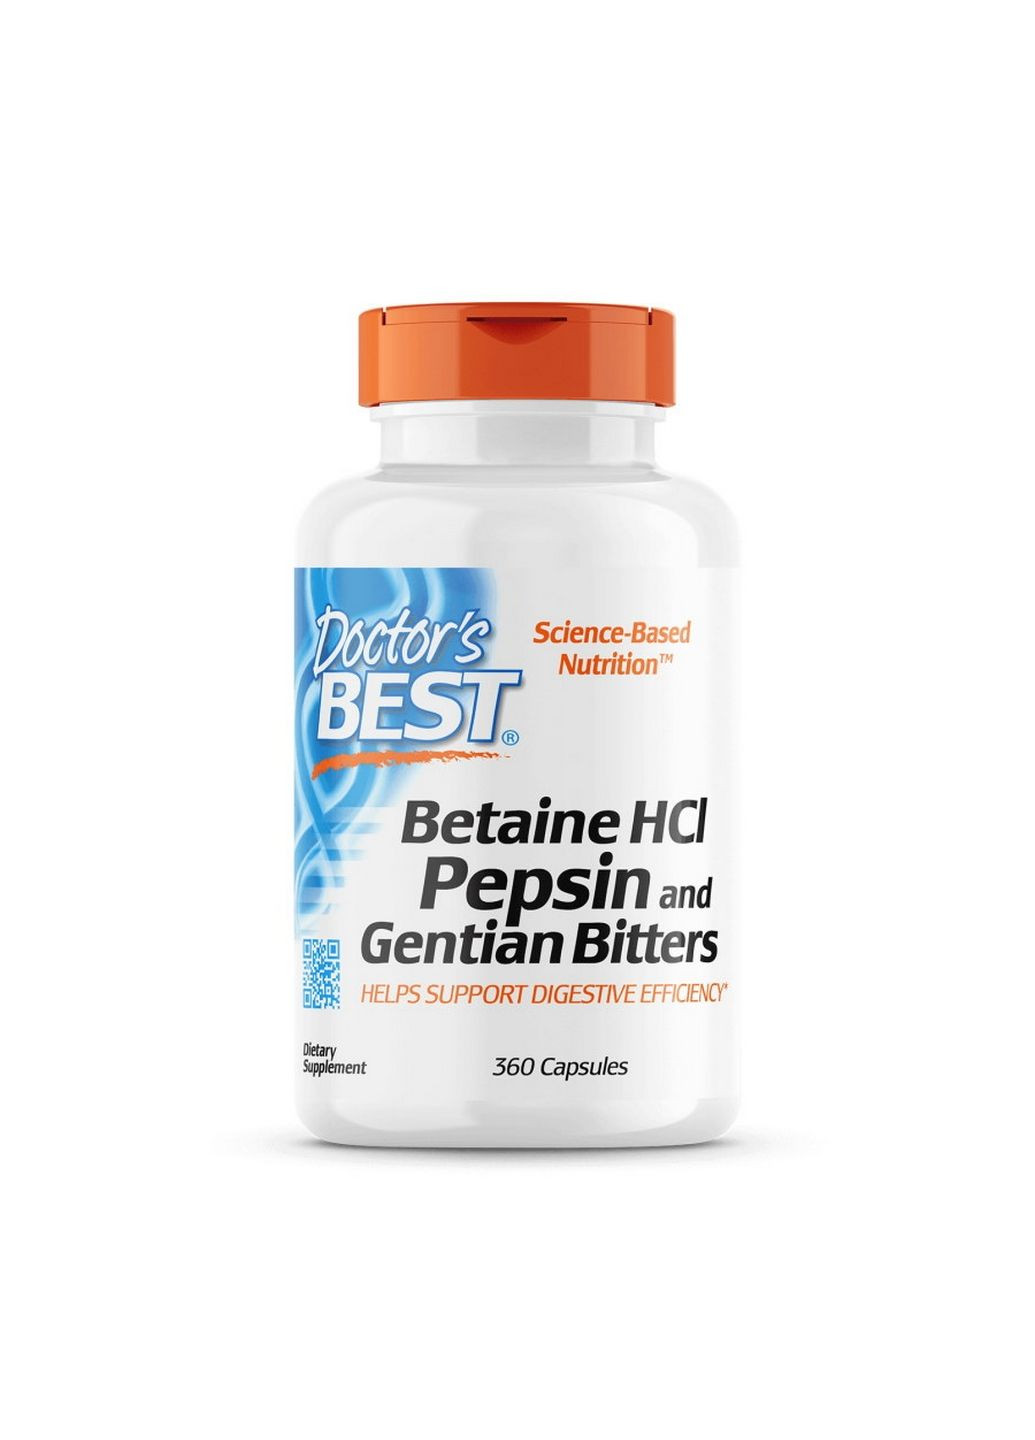 Натуральна добавка Betaine HCL Pepsin and Gentian Bitters, 360 капсул Doctor's Best (293476969)